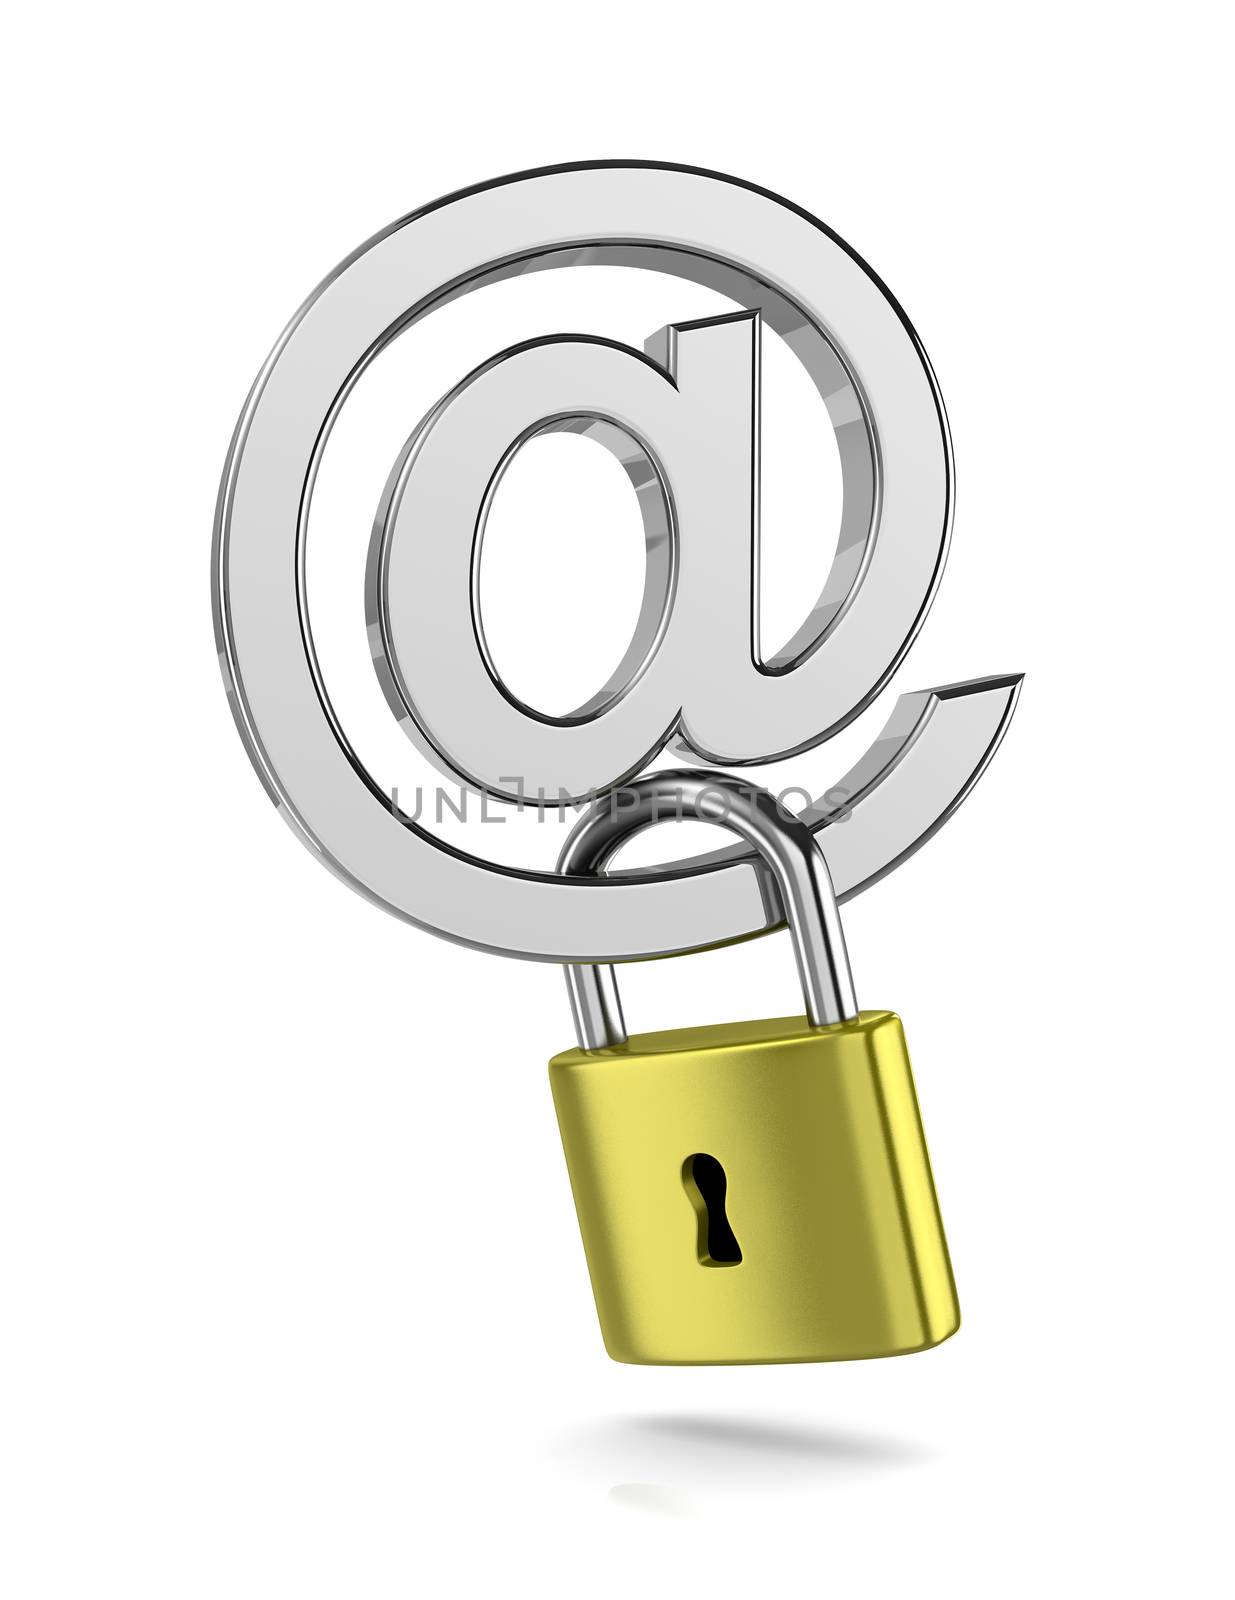 Email Chrome Sign with a Closed Padlock by make